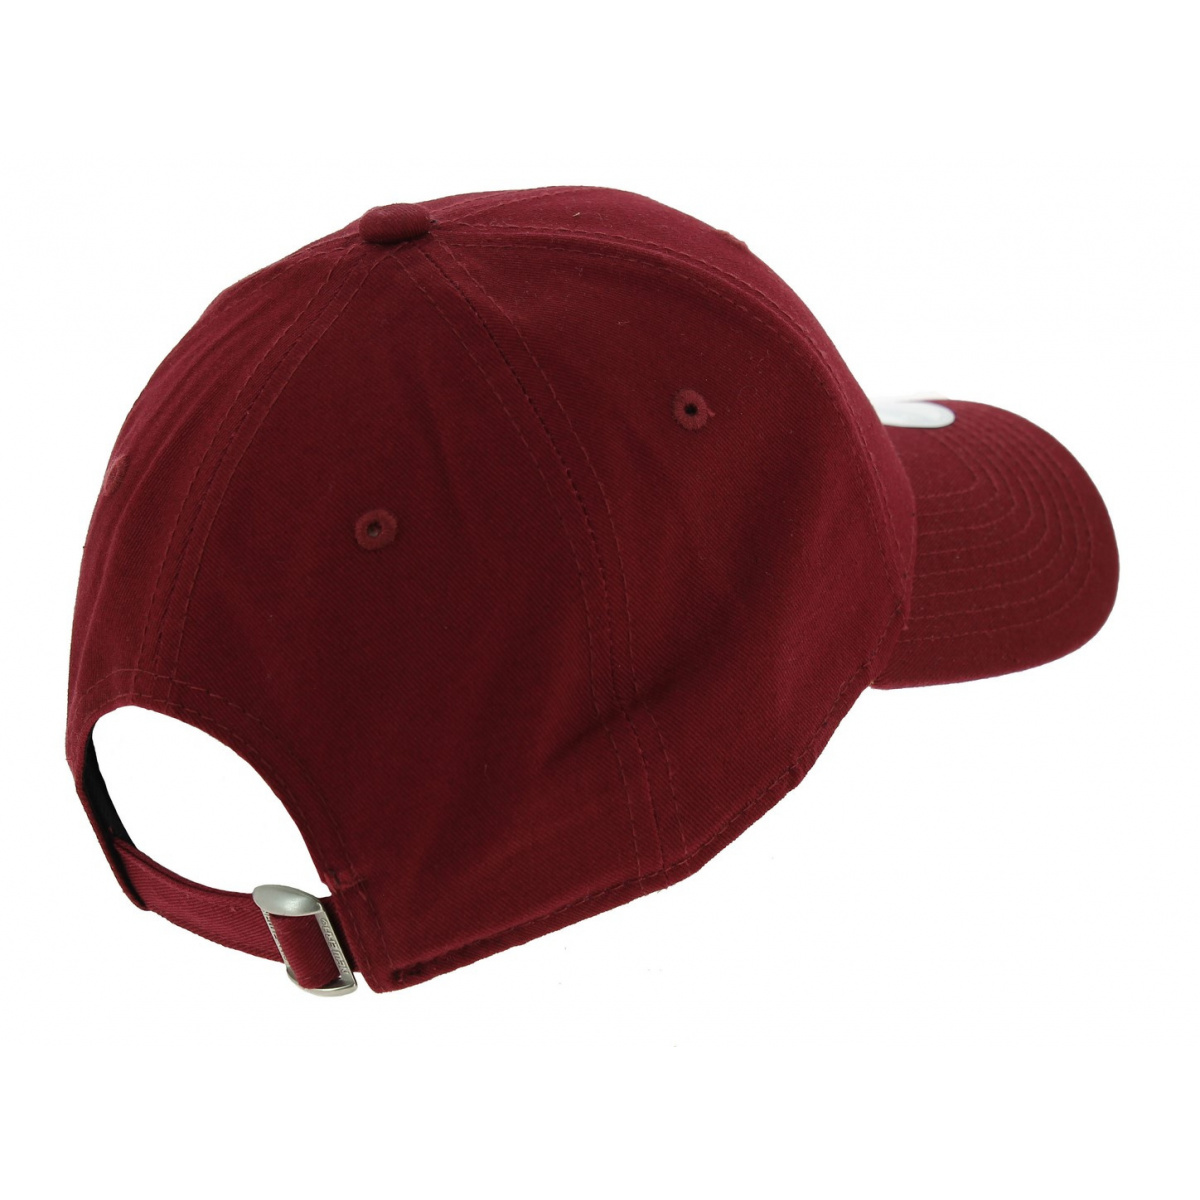 Baseball Cap 940 Essential Reference : Traclet - | New 7716 NY Bordeaux Era Chapellerie